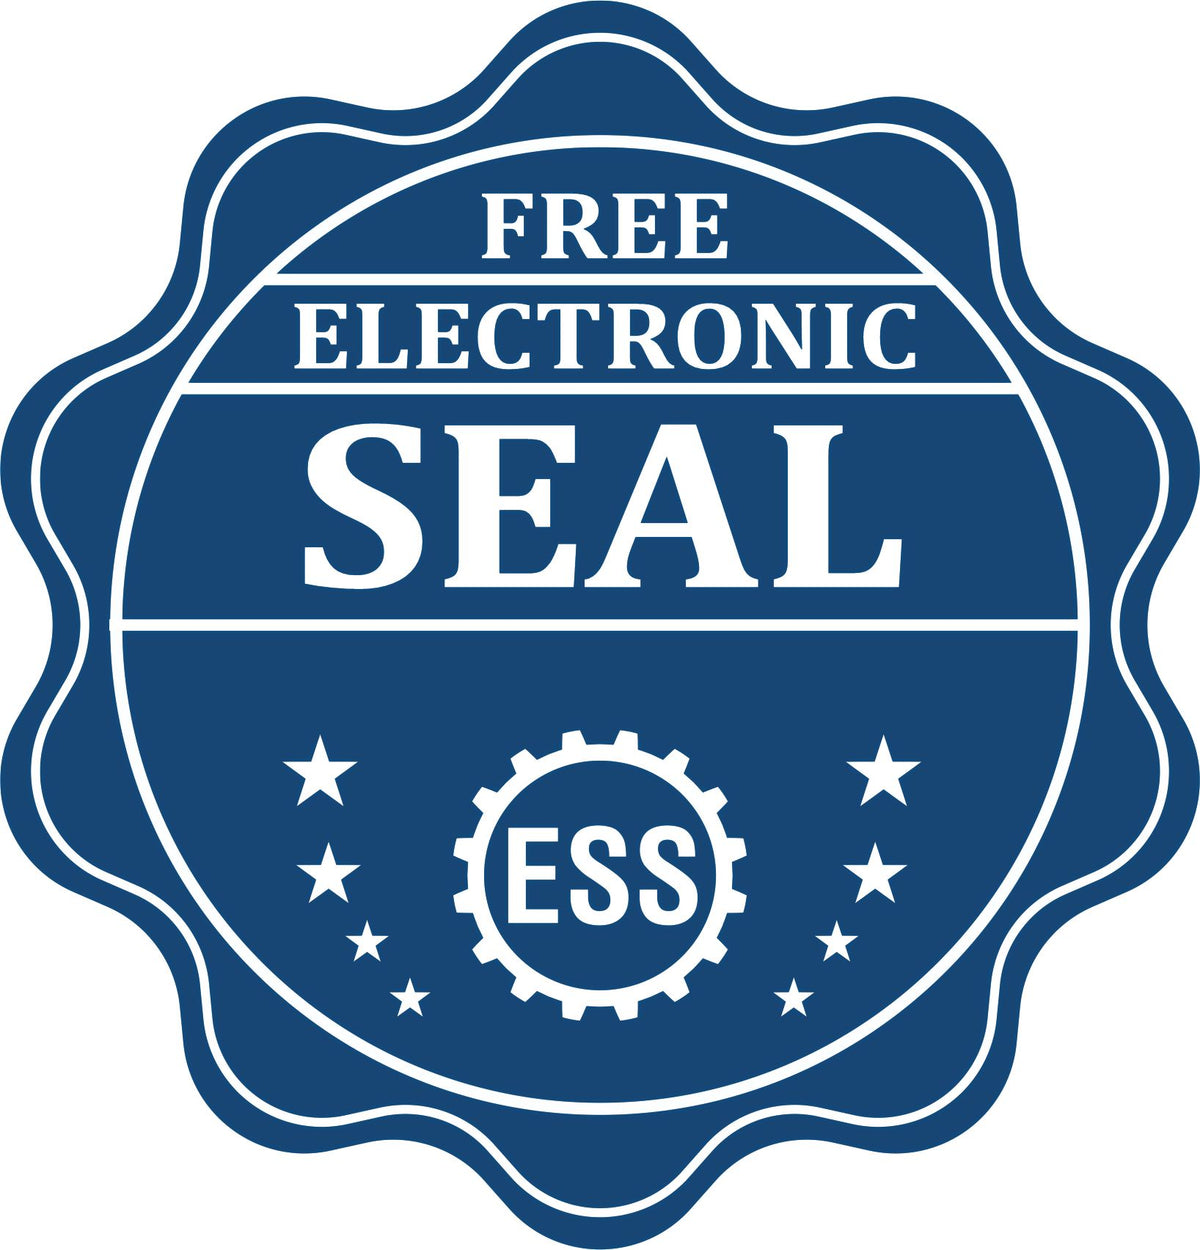 A badge showing a free electronic seal for the Slim Pre-Inked Rectangular Notary Stamp for Indiana with stars and the ESS gear on the emblem.